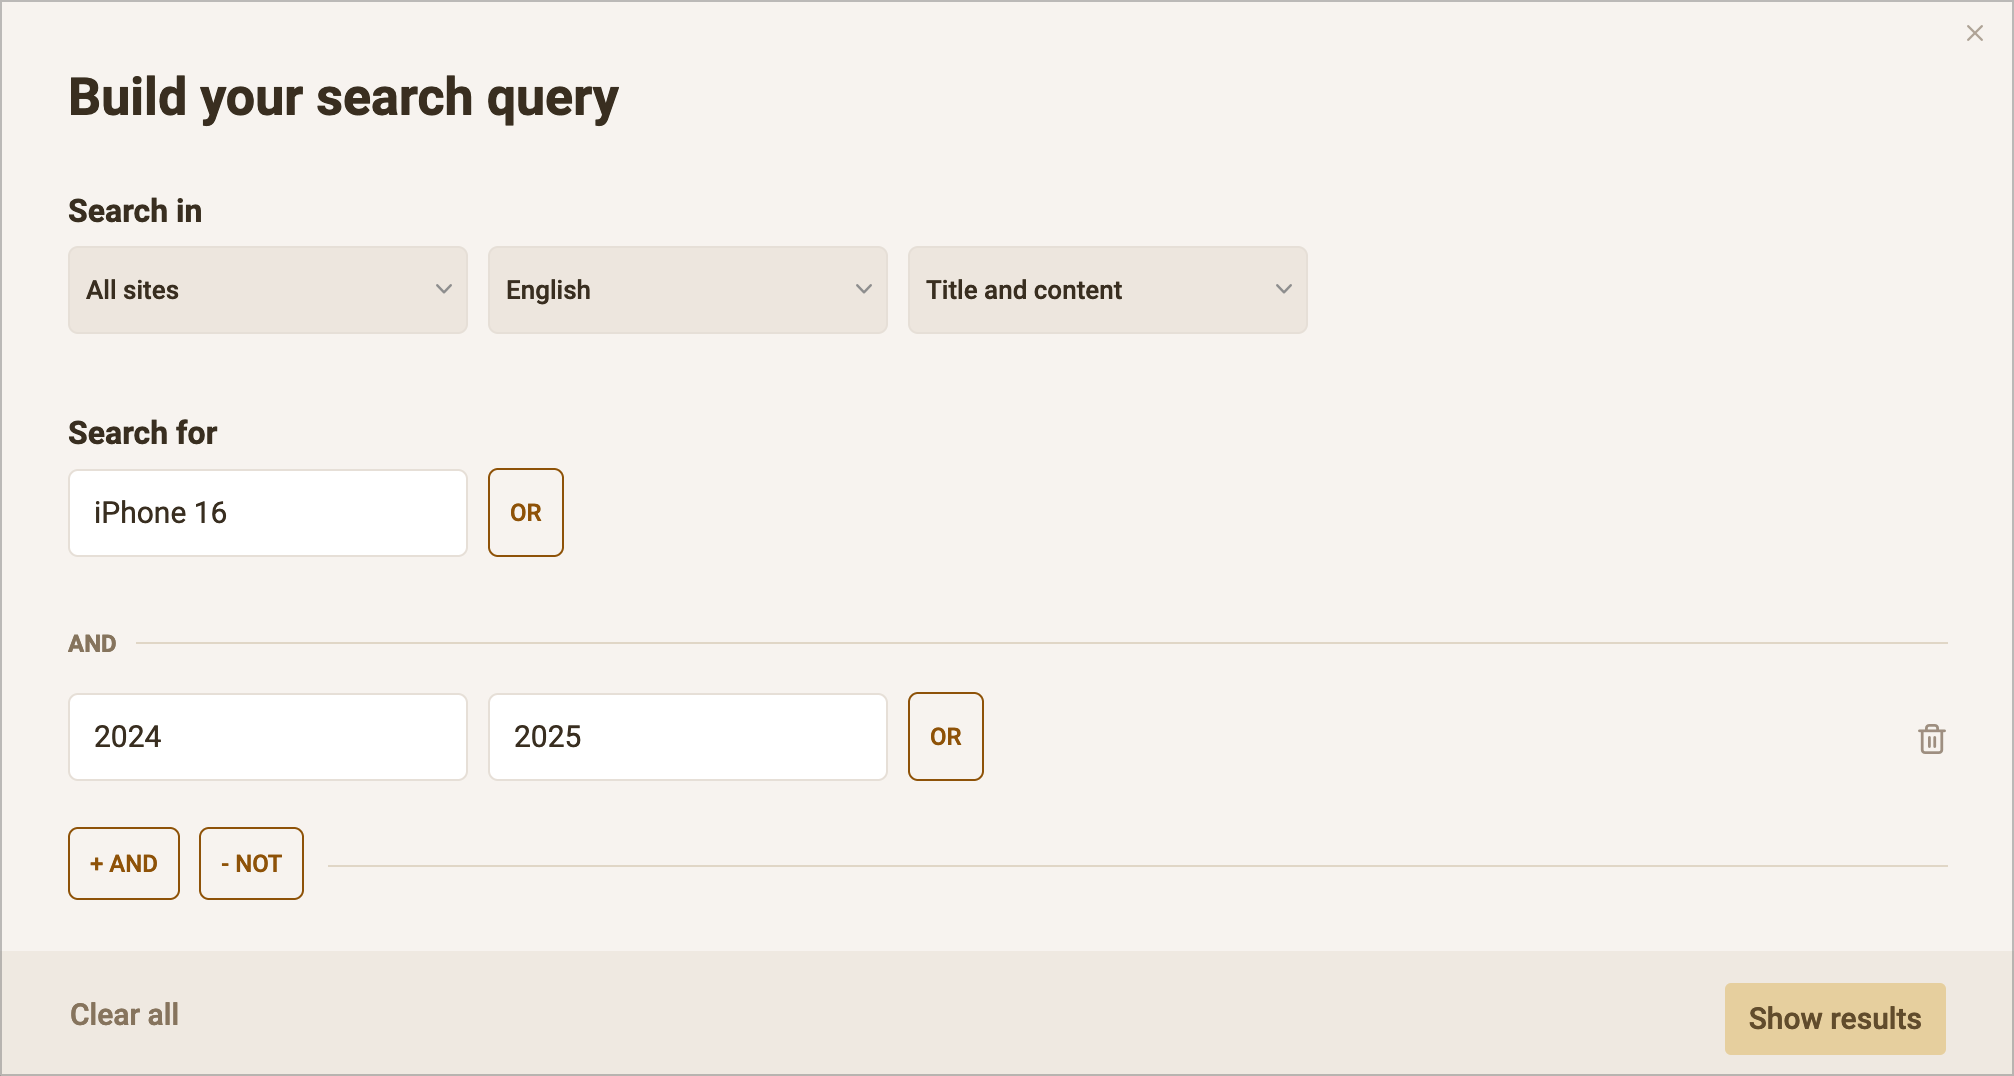 The build search query window